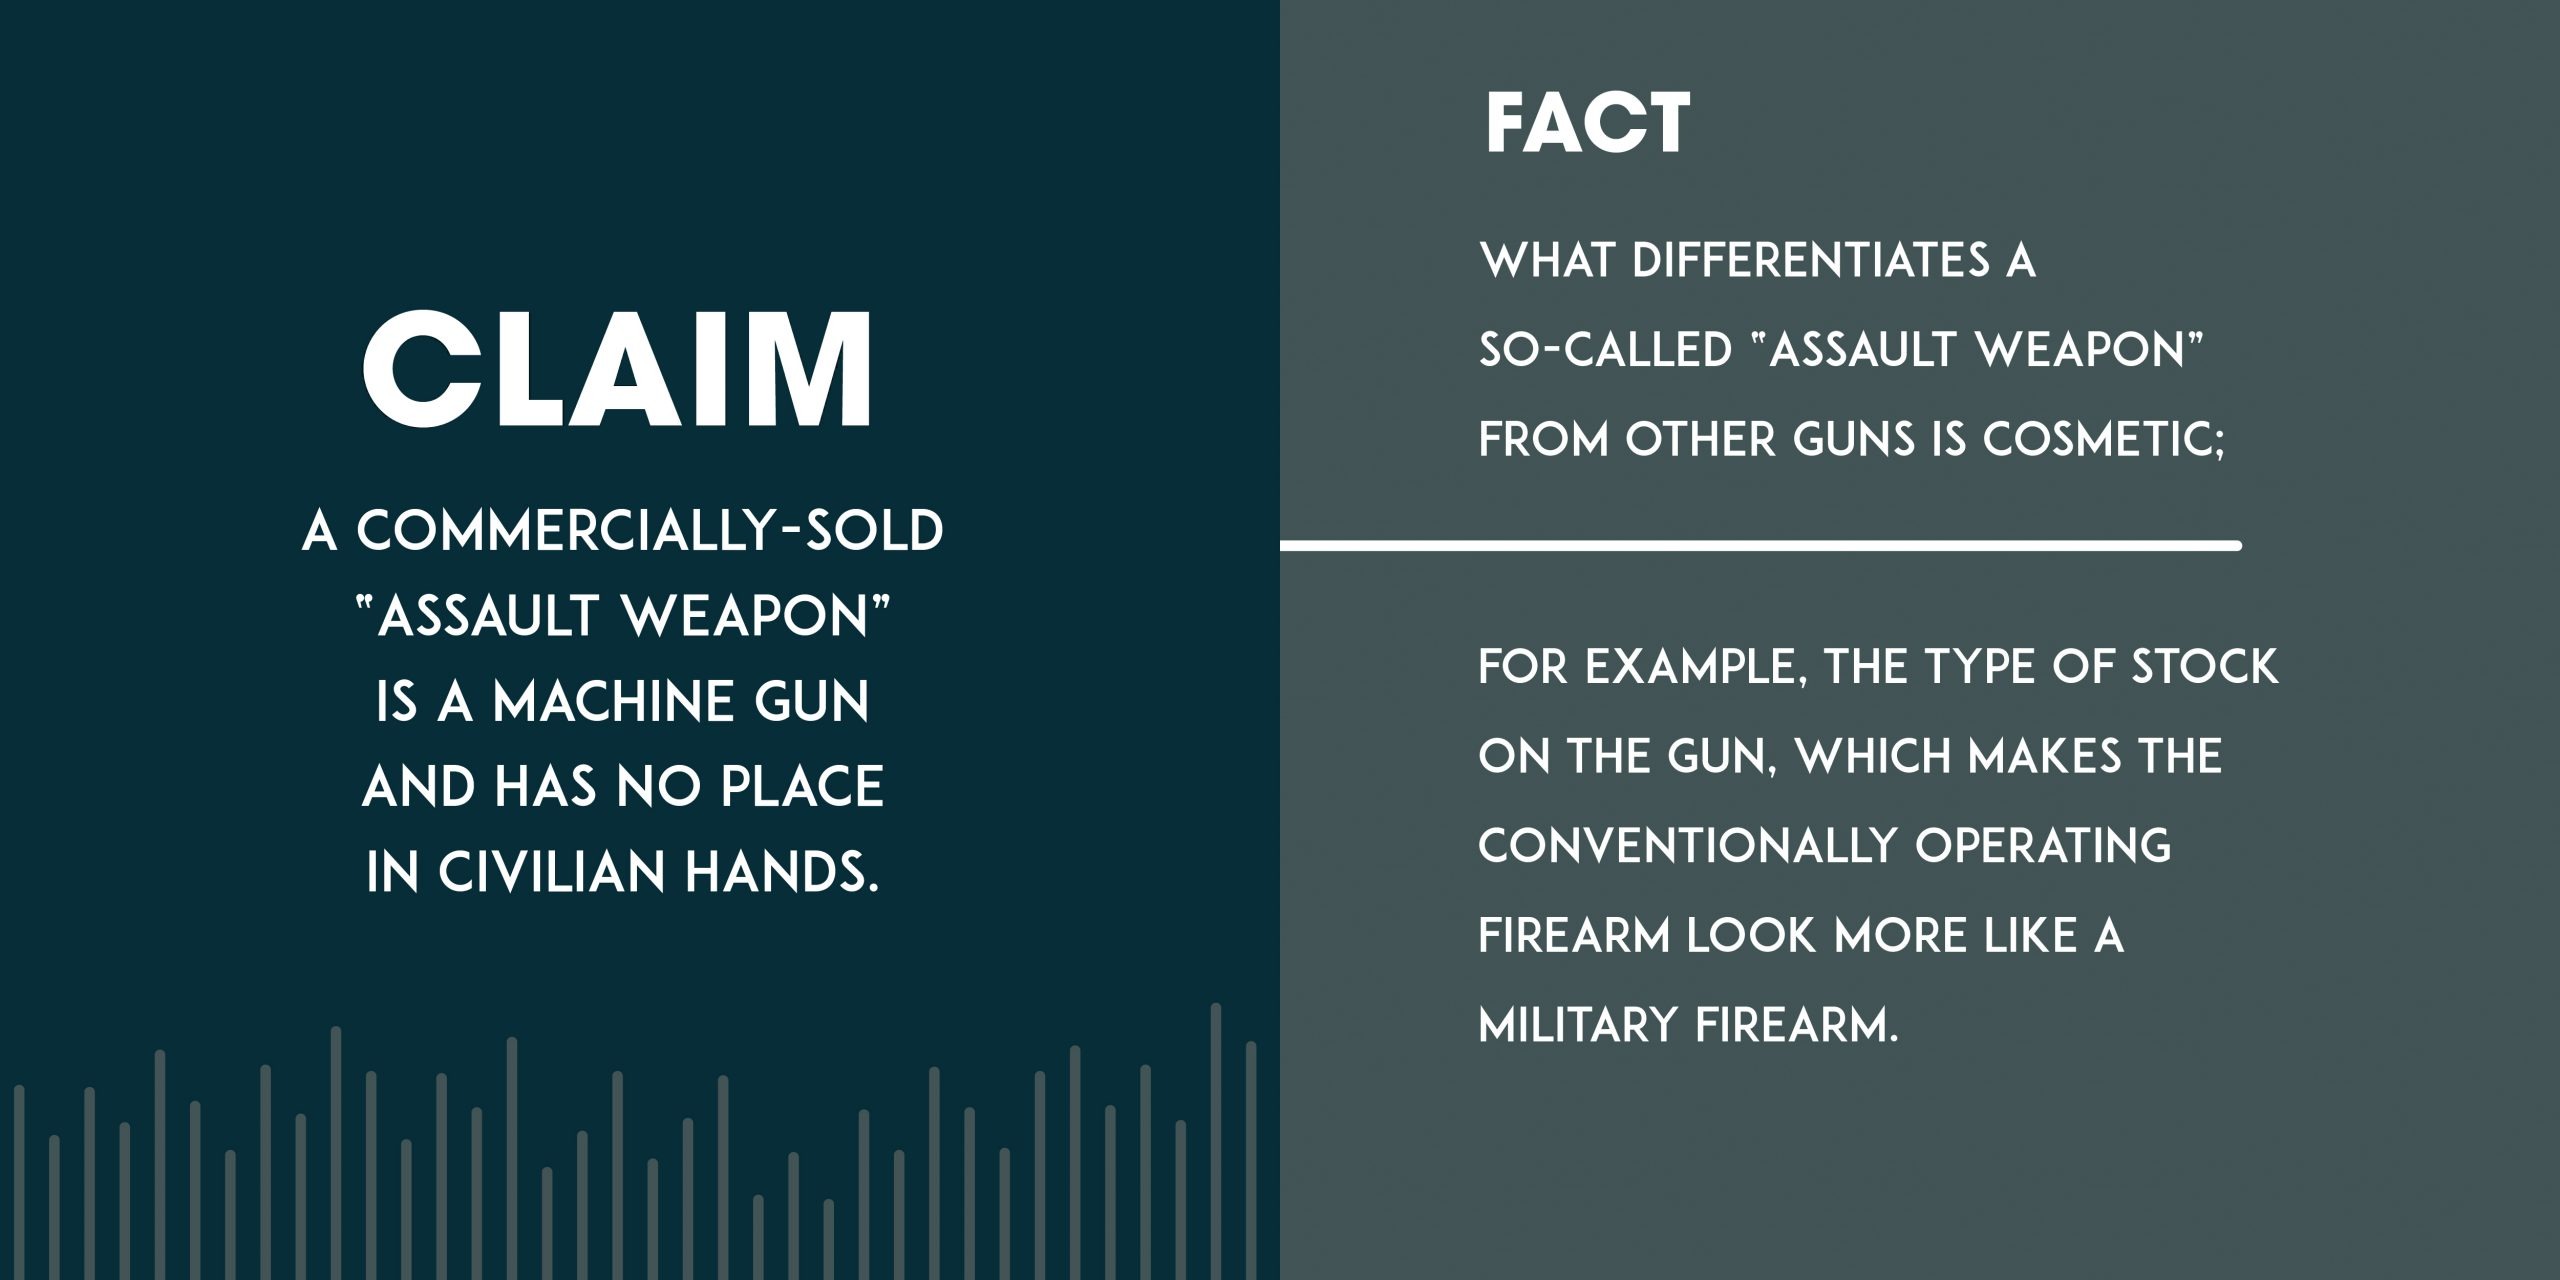 What+has+incorrectly+been+termed+an+“assault+weapon”+is+a+semi-automatic+firearm+that+fires+just+one+bullet+with+each+pull+of+the+trigger+(versus+a+fully+automatic+firearm+—+machine+gun+—+which+continues+to+shoot+until+the+trigger+is+released).